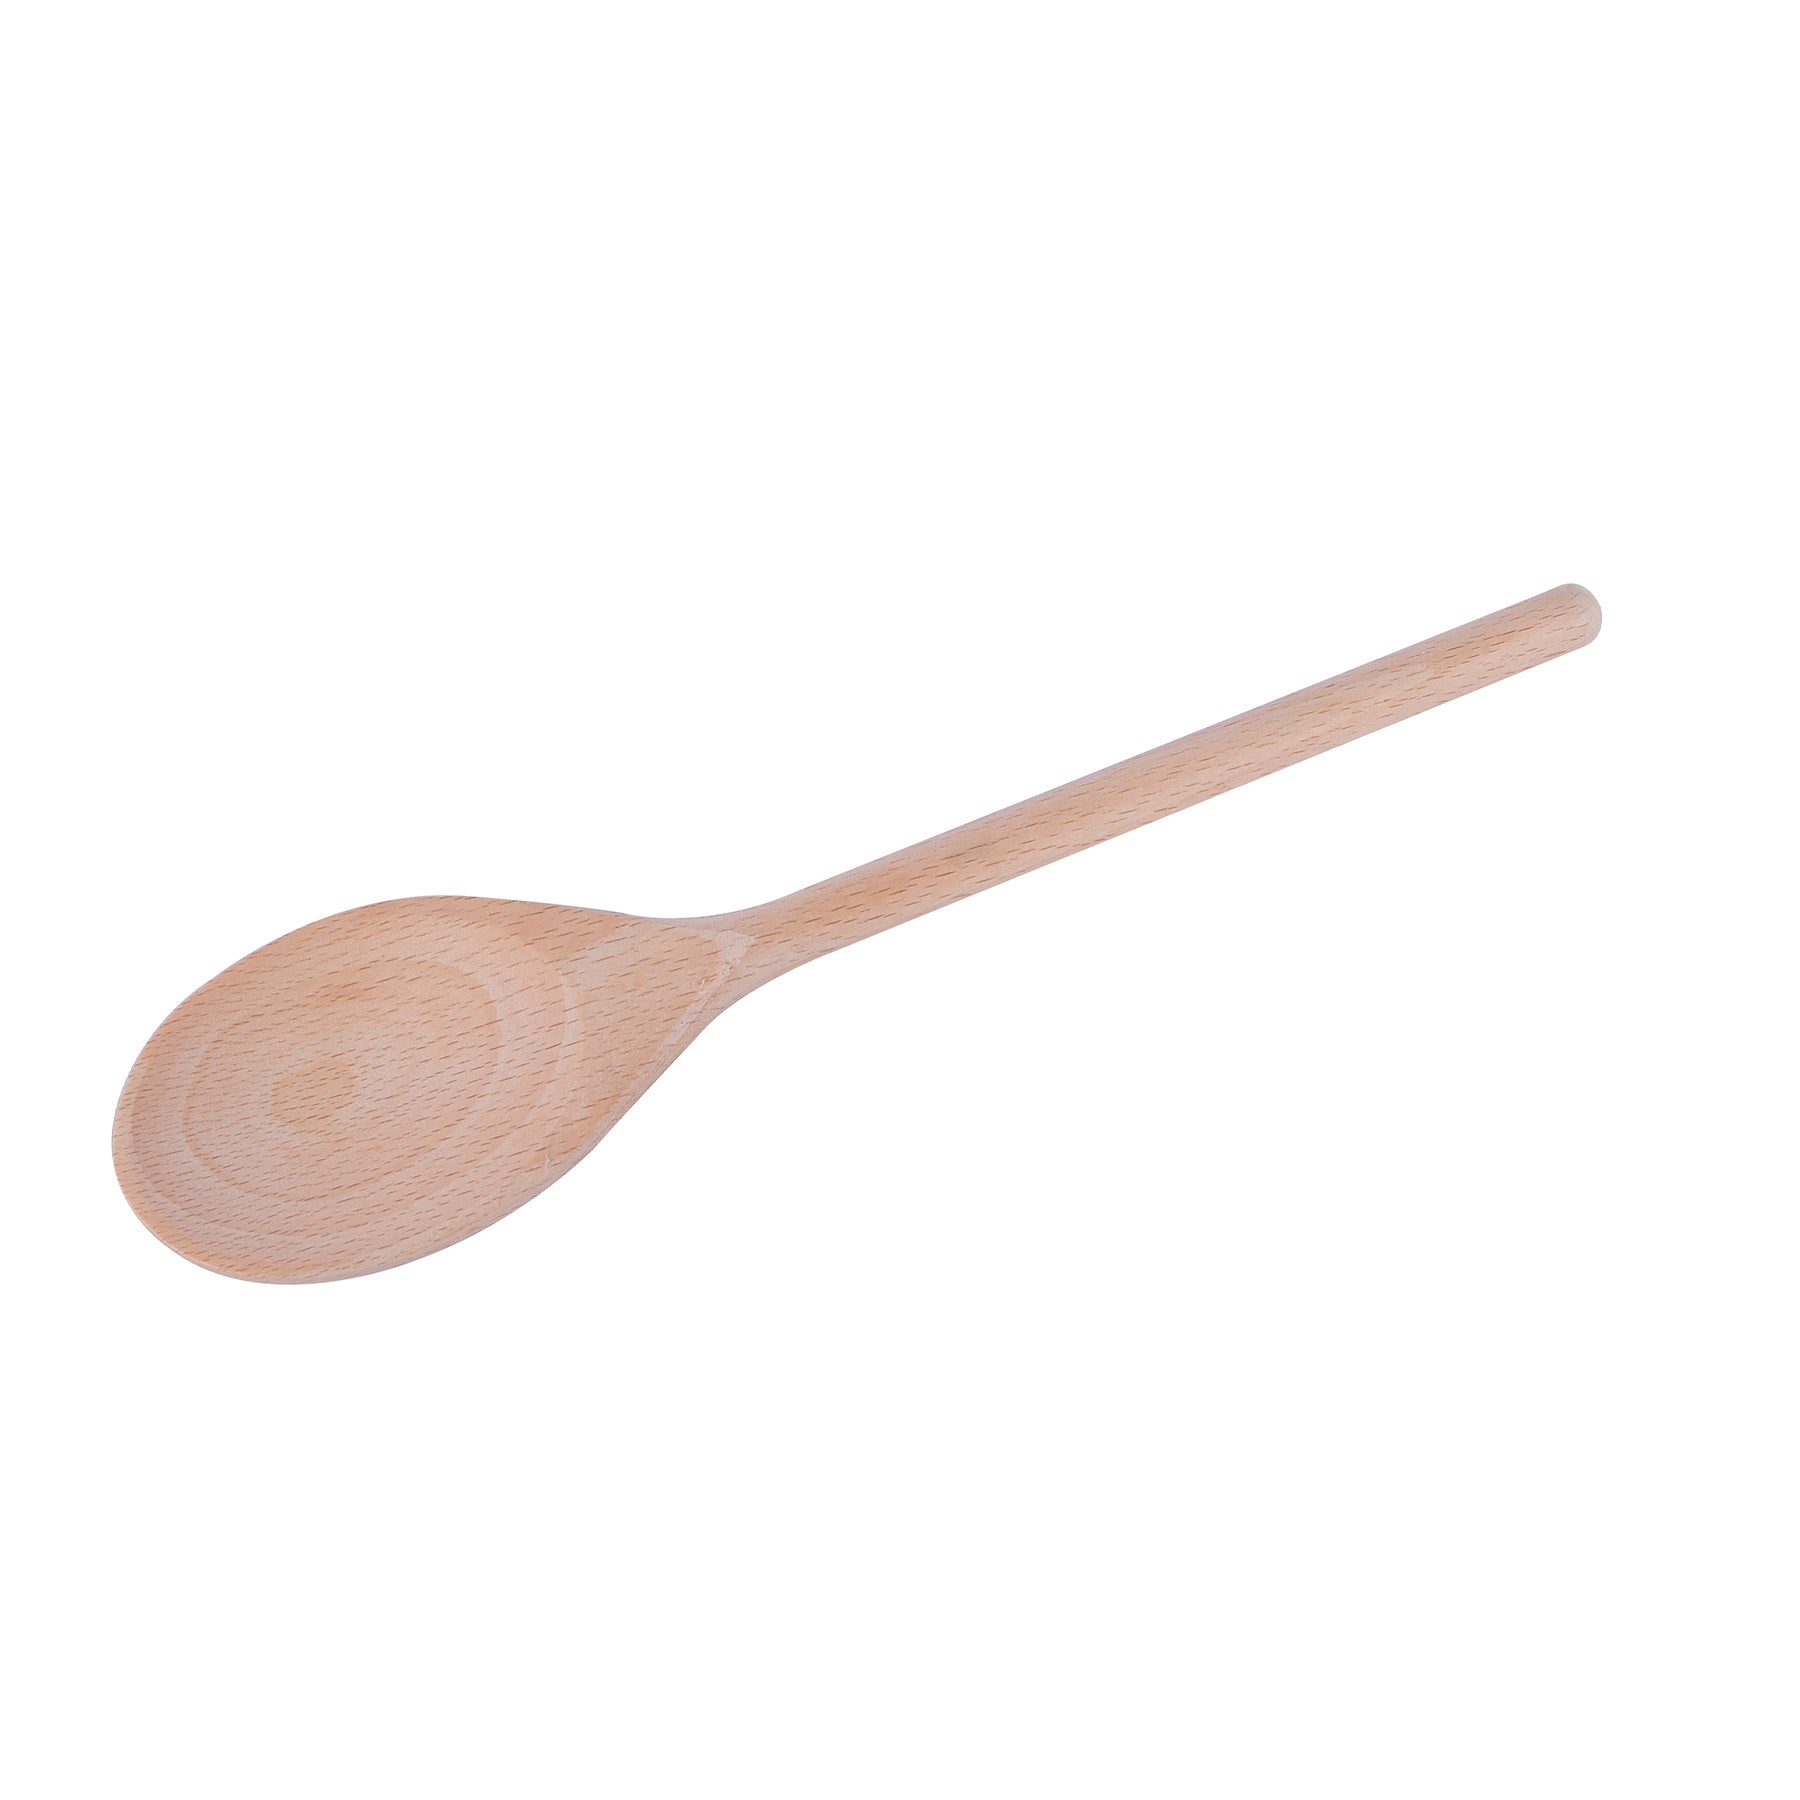 Wooden mixing spoon, NaturalSize: 25 cm